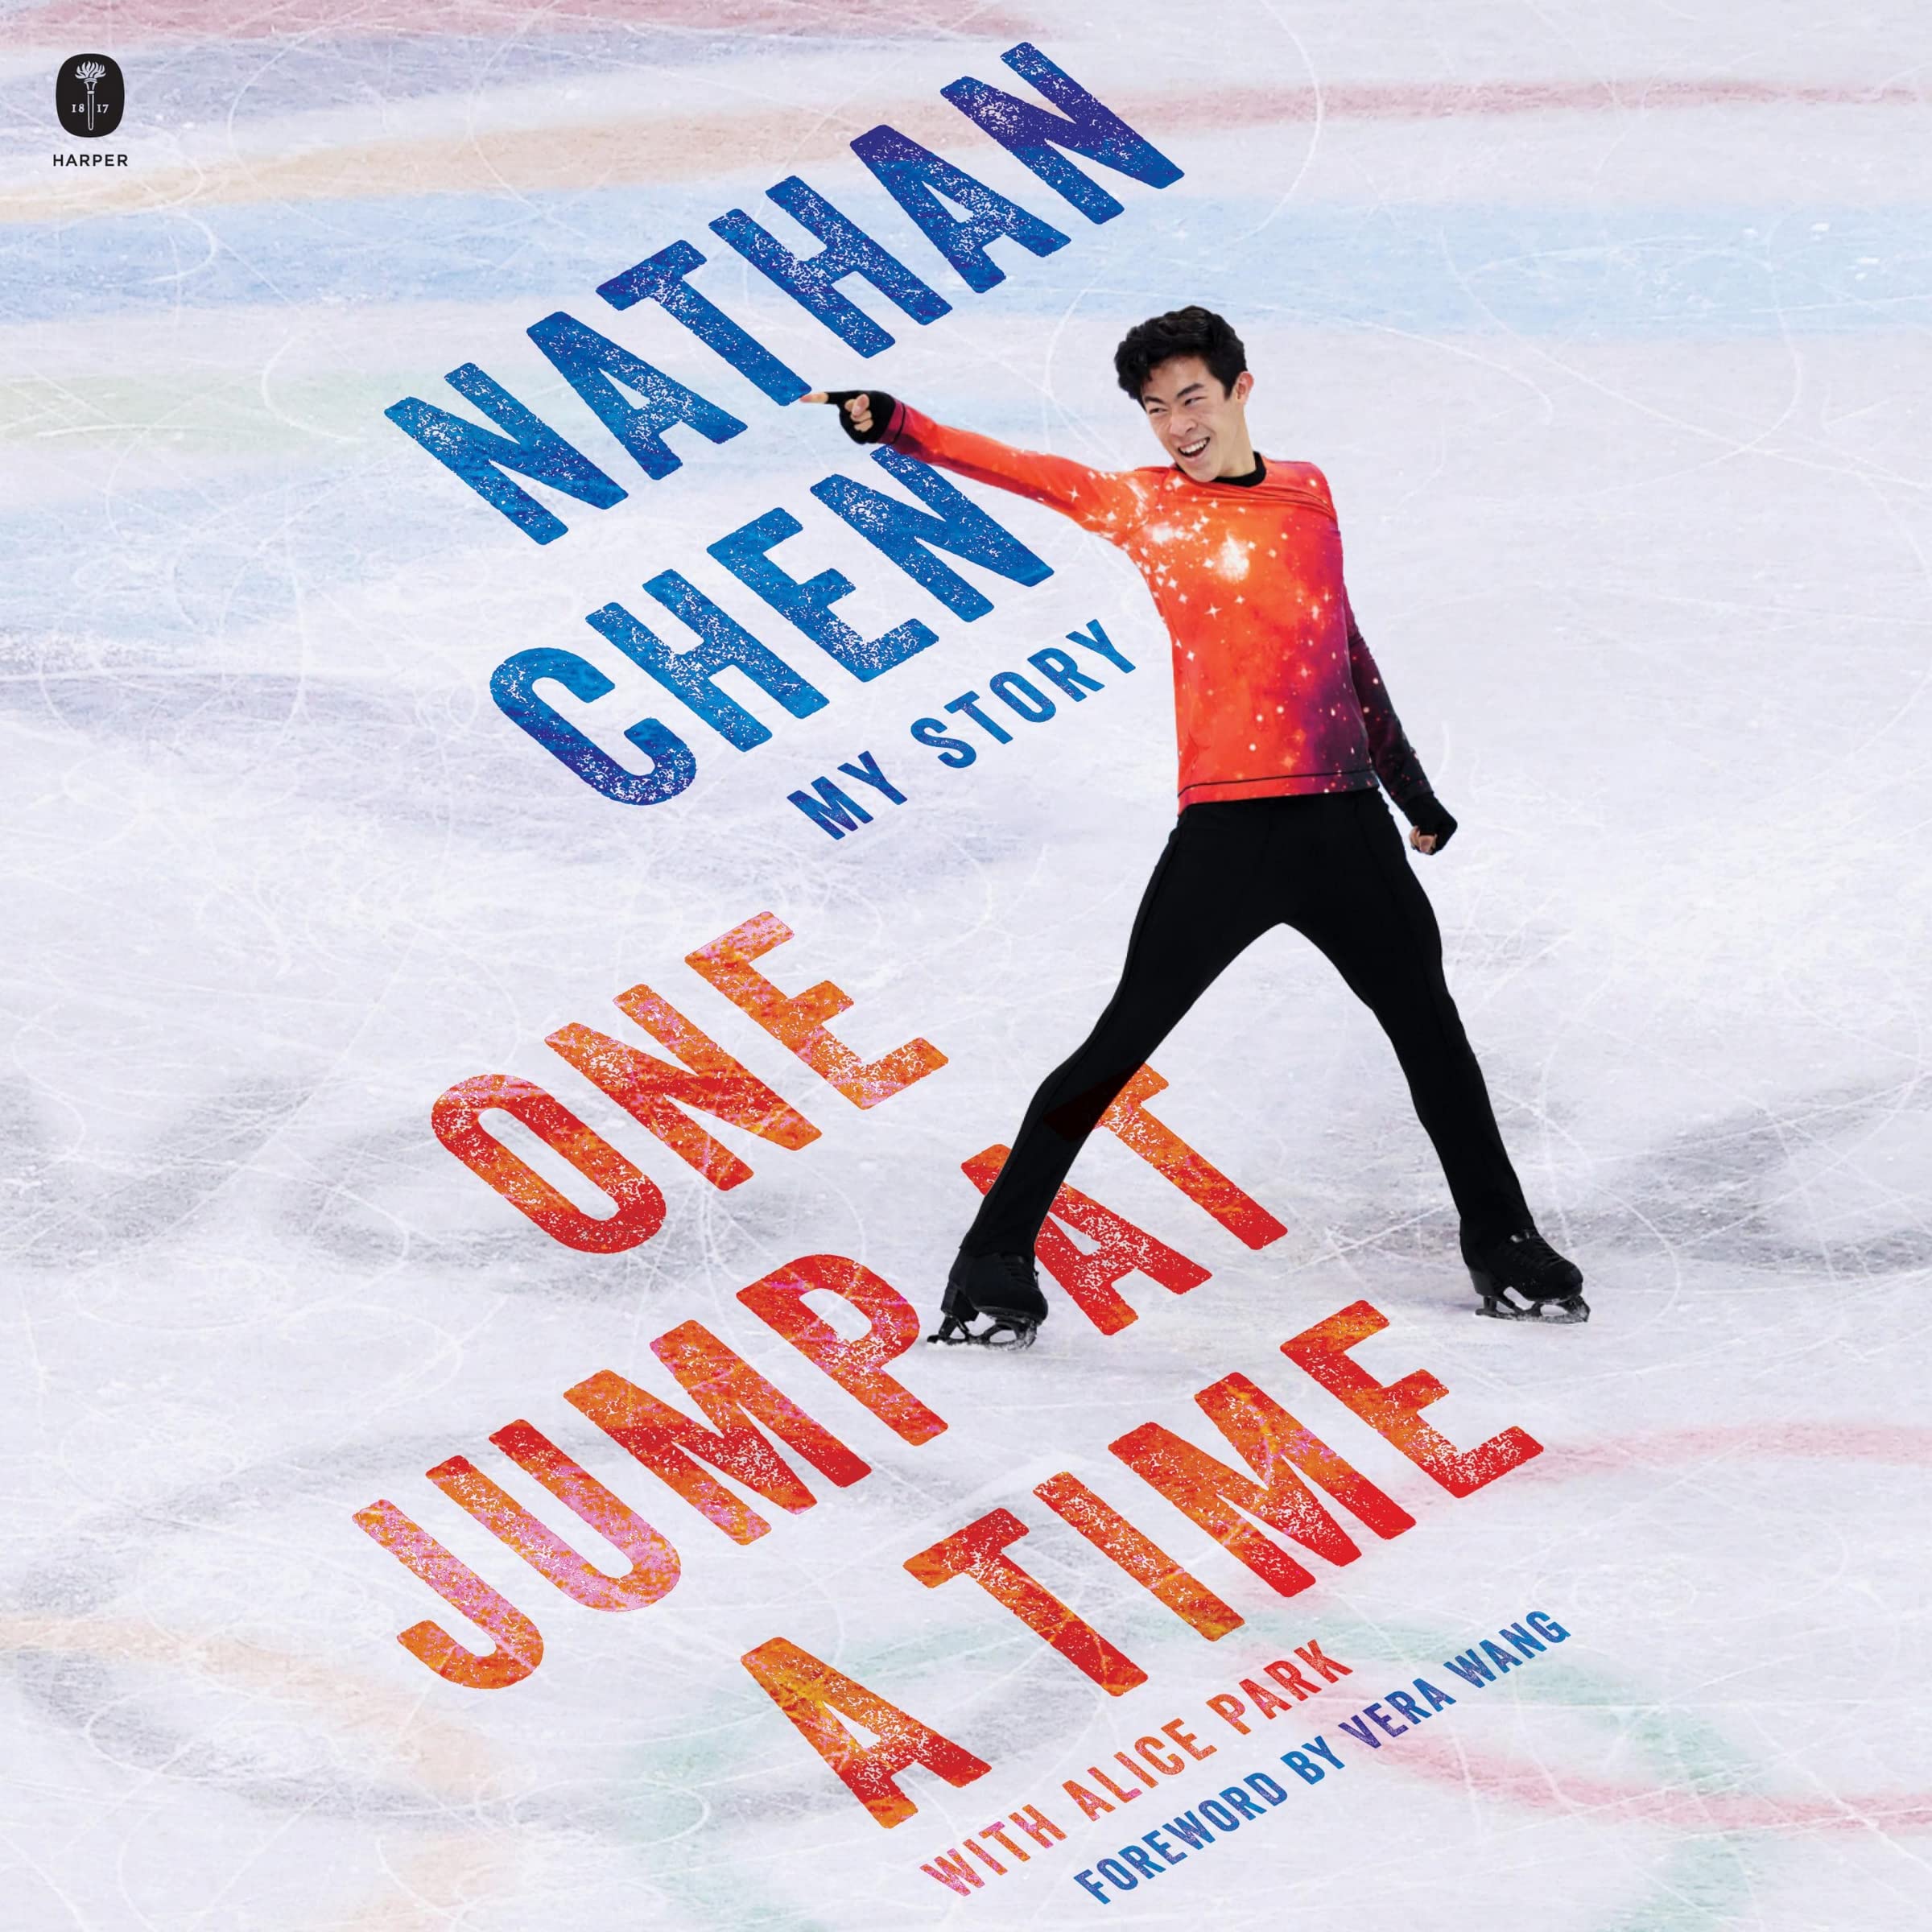 One Jump at a Time: My Story (MP3 CD)